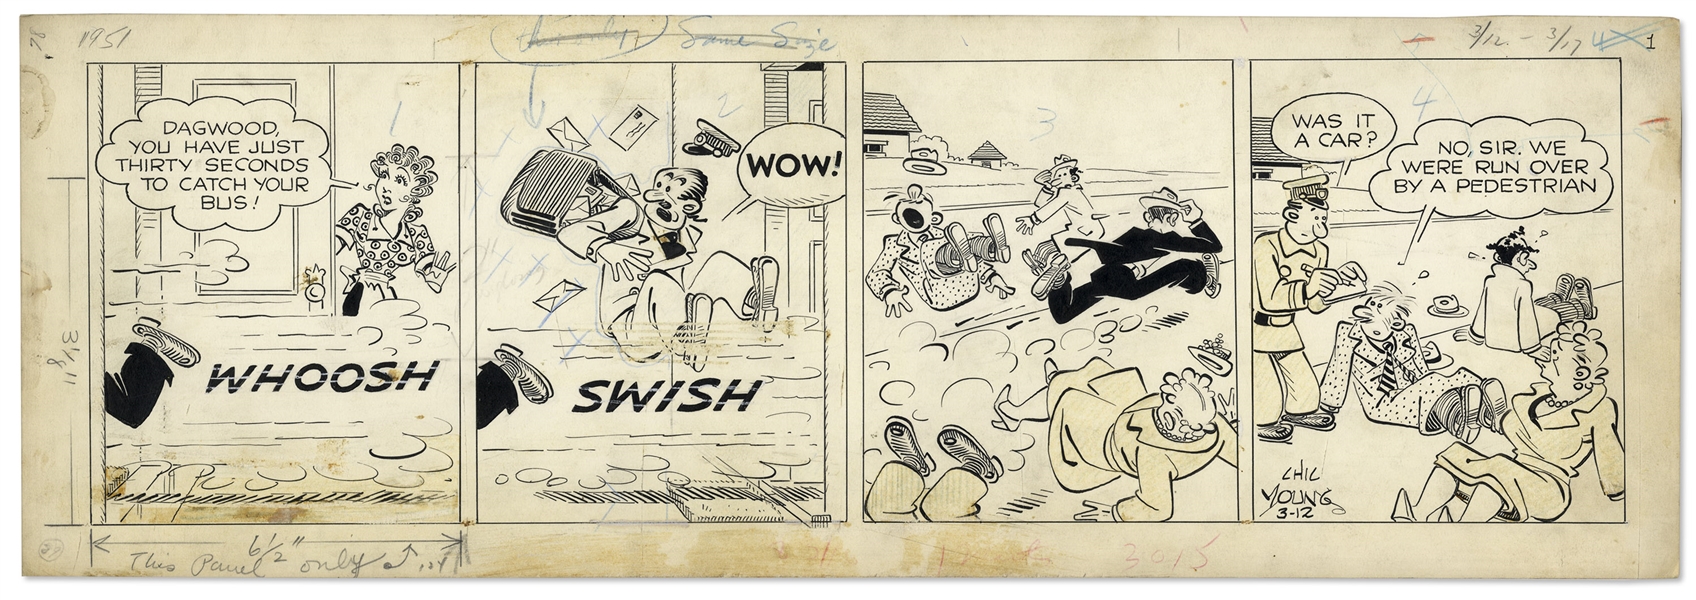 2 Chic Young Hand-Drawn ''Blondie'' Comic Strips From 1951 Titled ''The Mutt's A Genius!'' and ''Hit And Run''